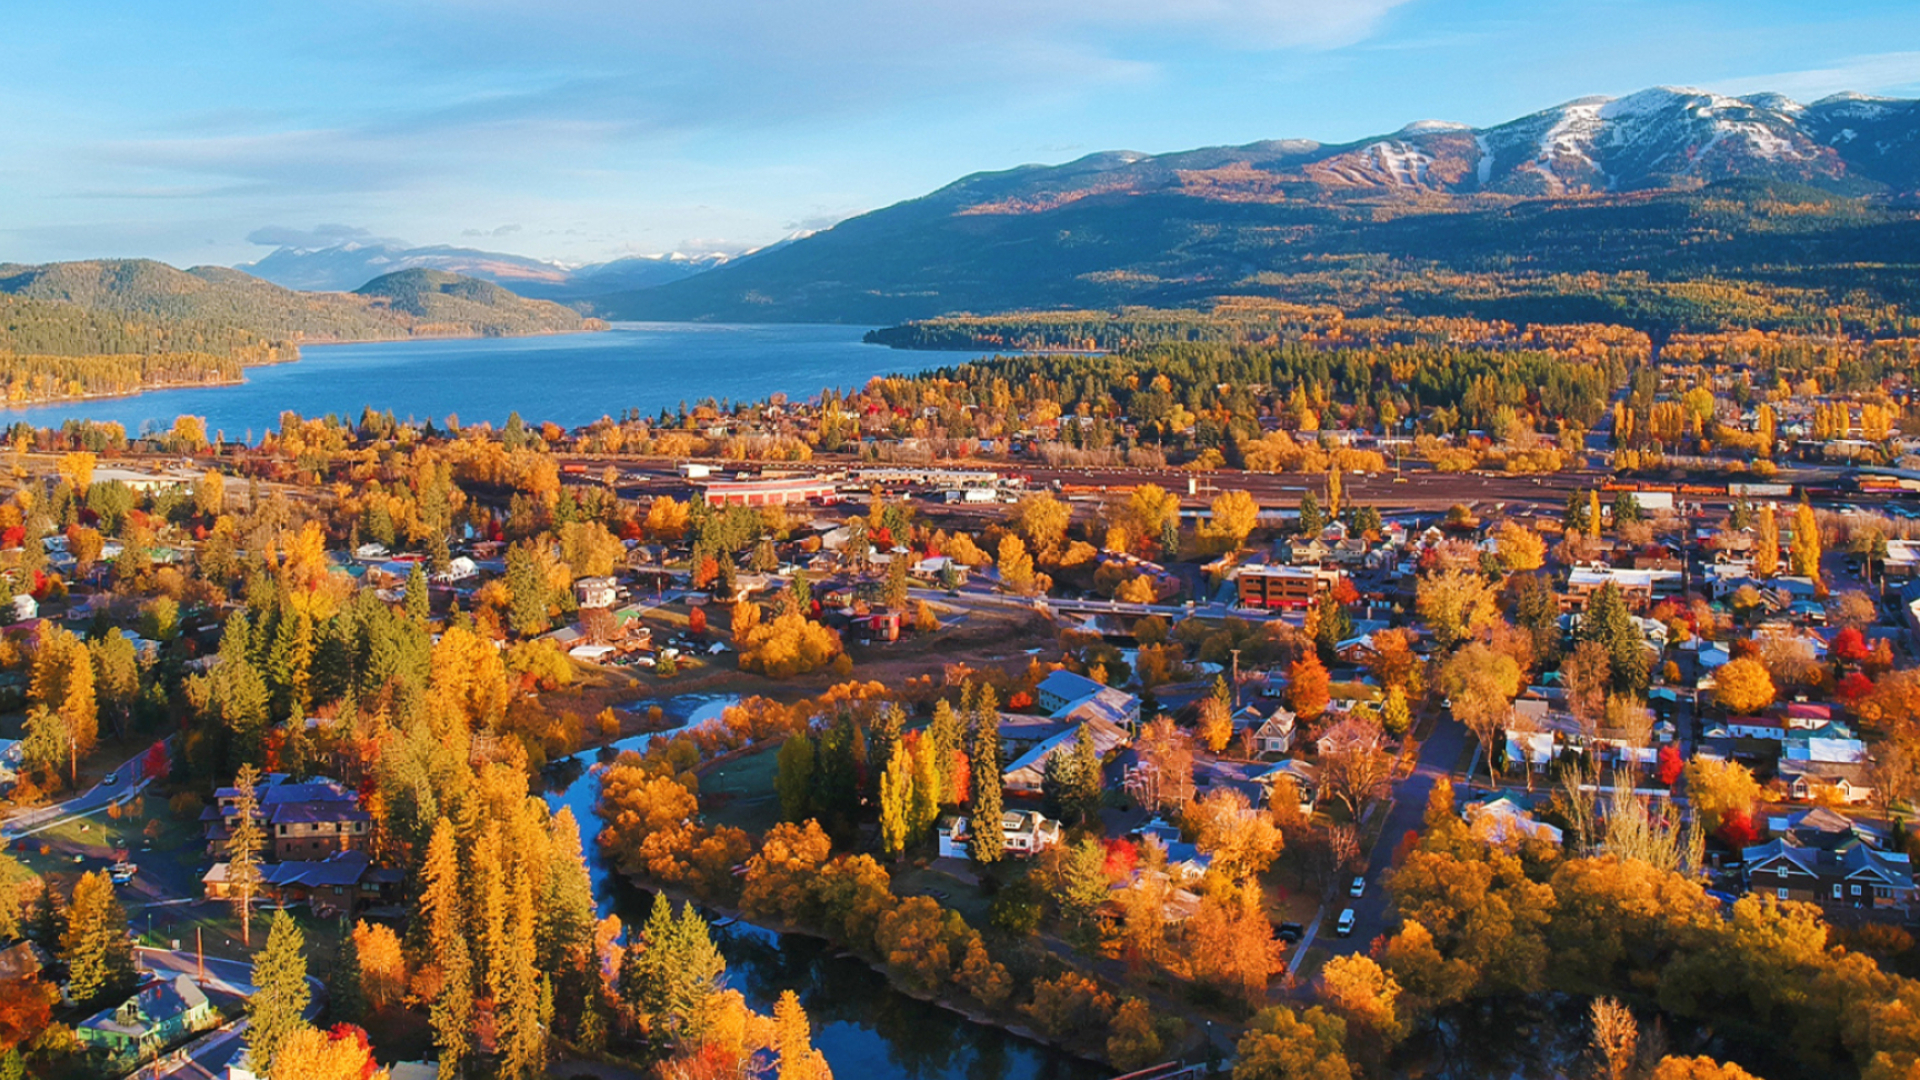 Whitefish Montana, Lodging and dining, Official visitor information, Travels, 1920x1080 Full HD Desktop